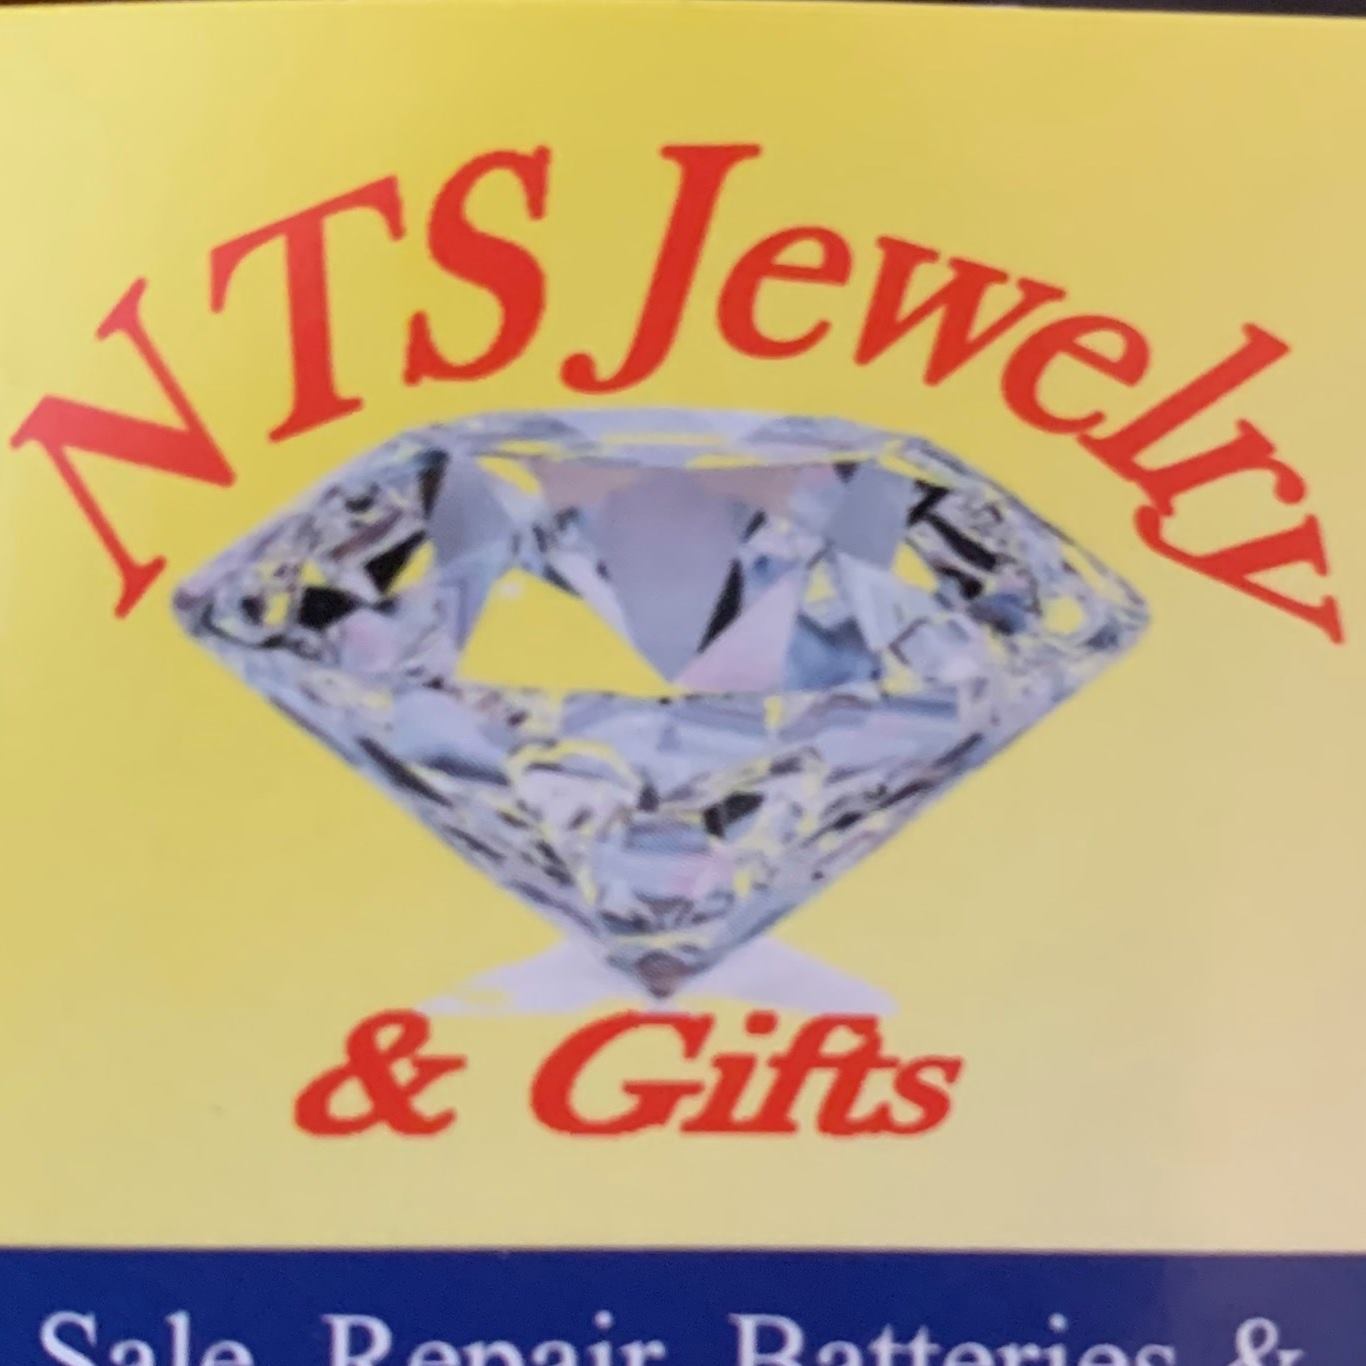 NTS Jewelry & Gifts